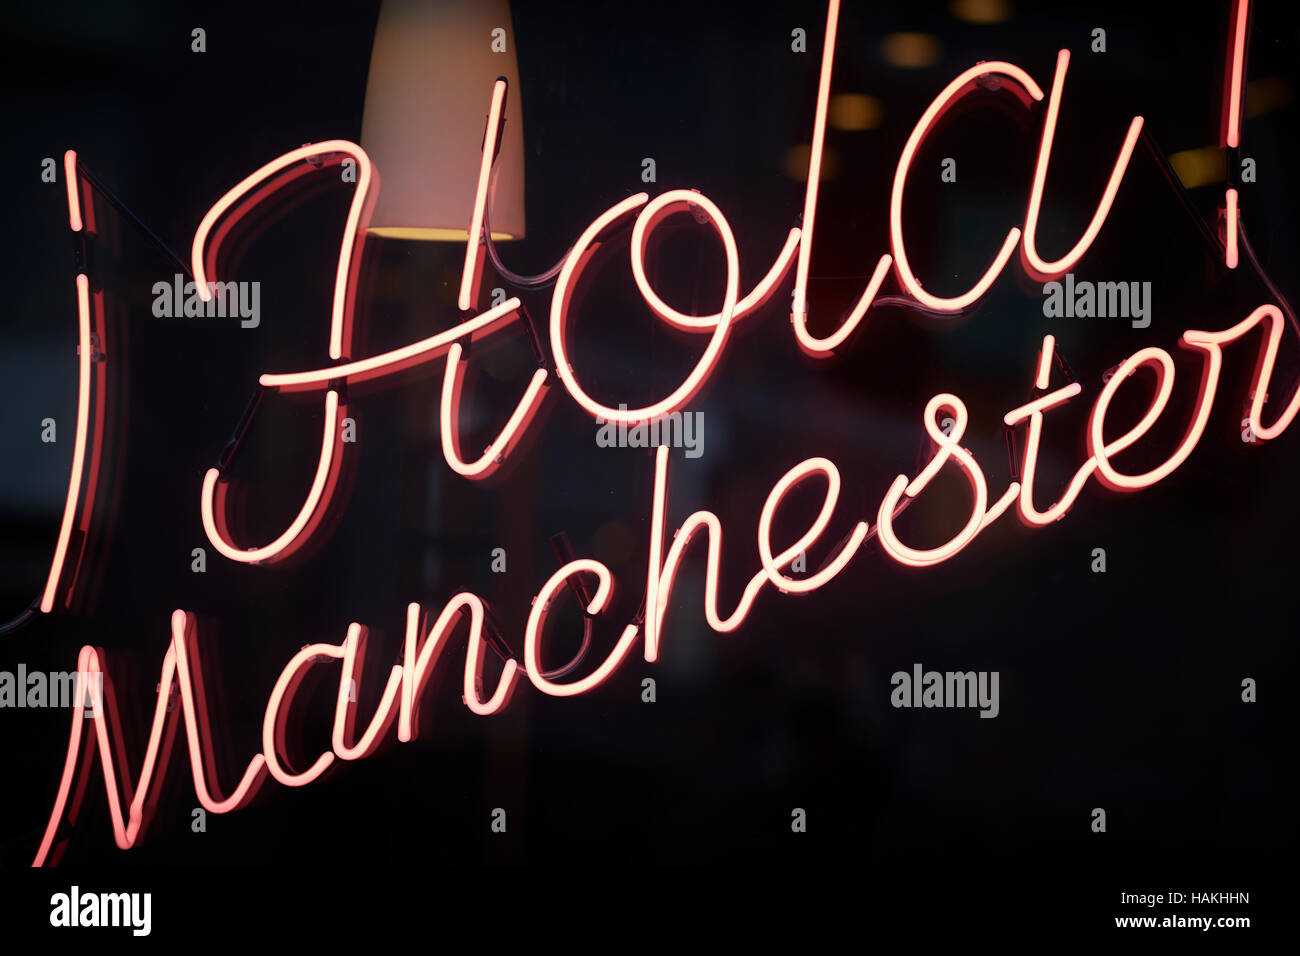 Hola Manchester neon sign shop window   Barburrito Mexican fats food takeaway signage red light food shore shop displayed Stock Photo